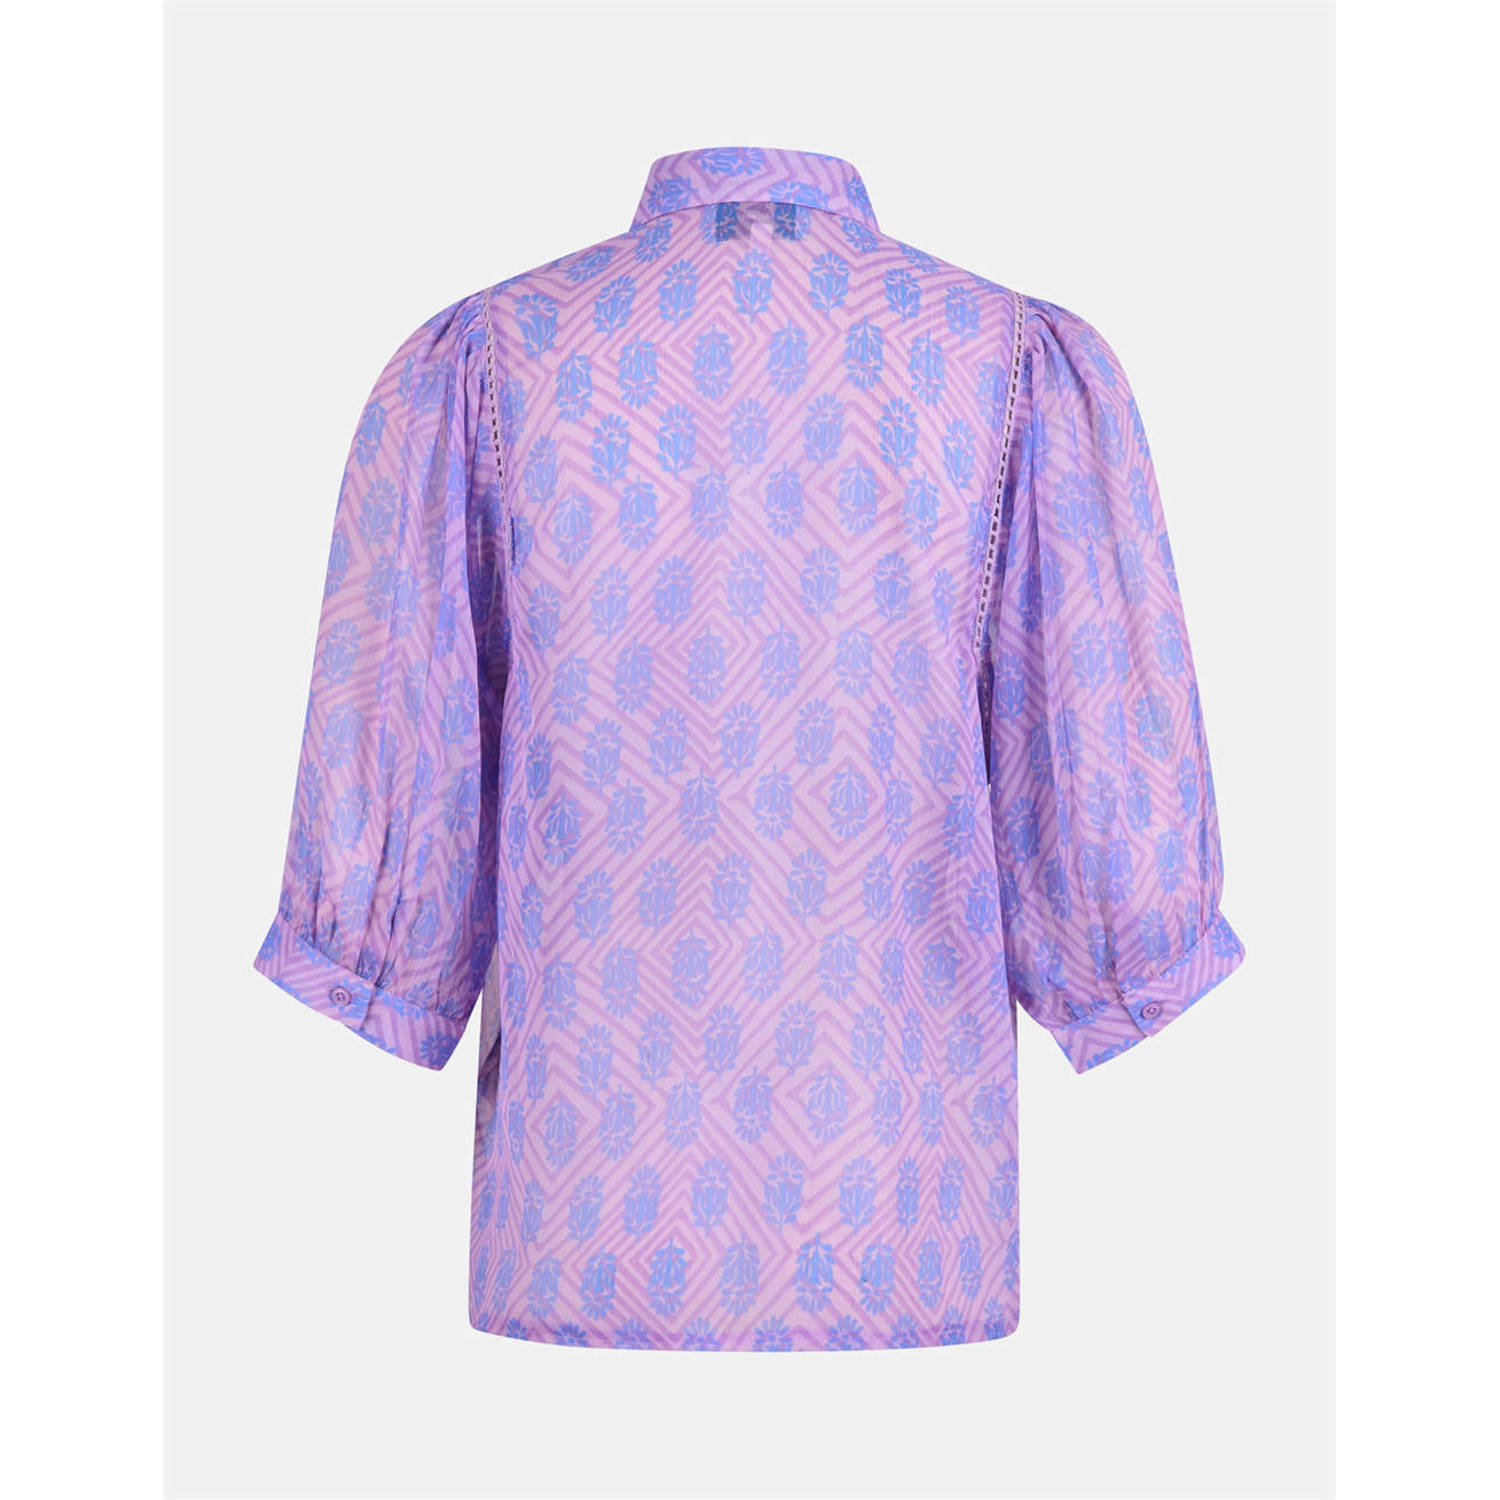 Shoeby blouse met all over print lila lichtblauw